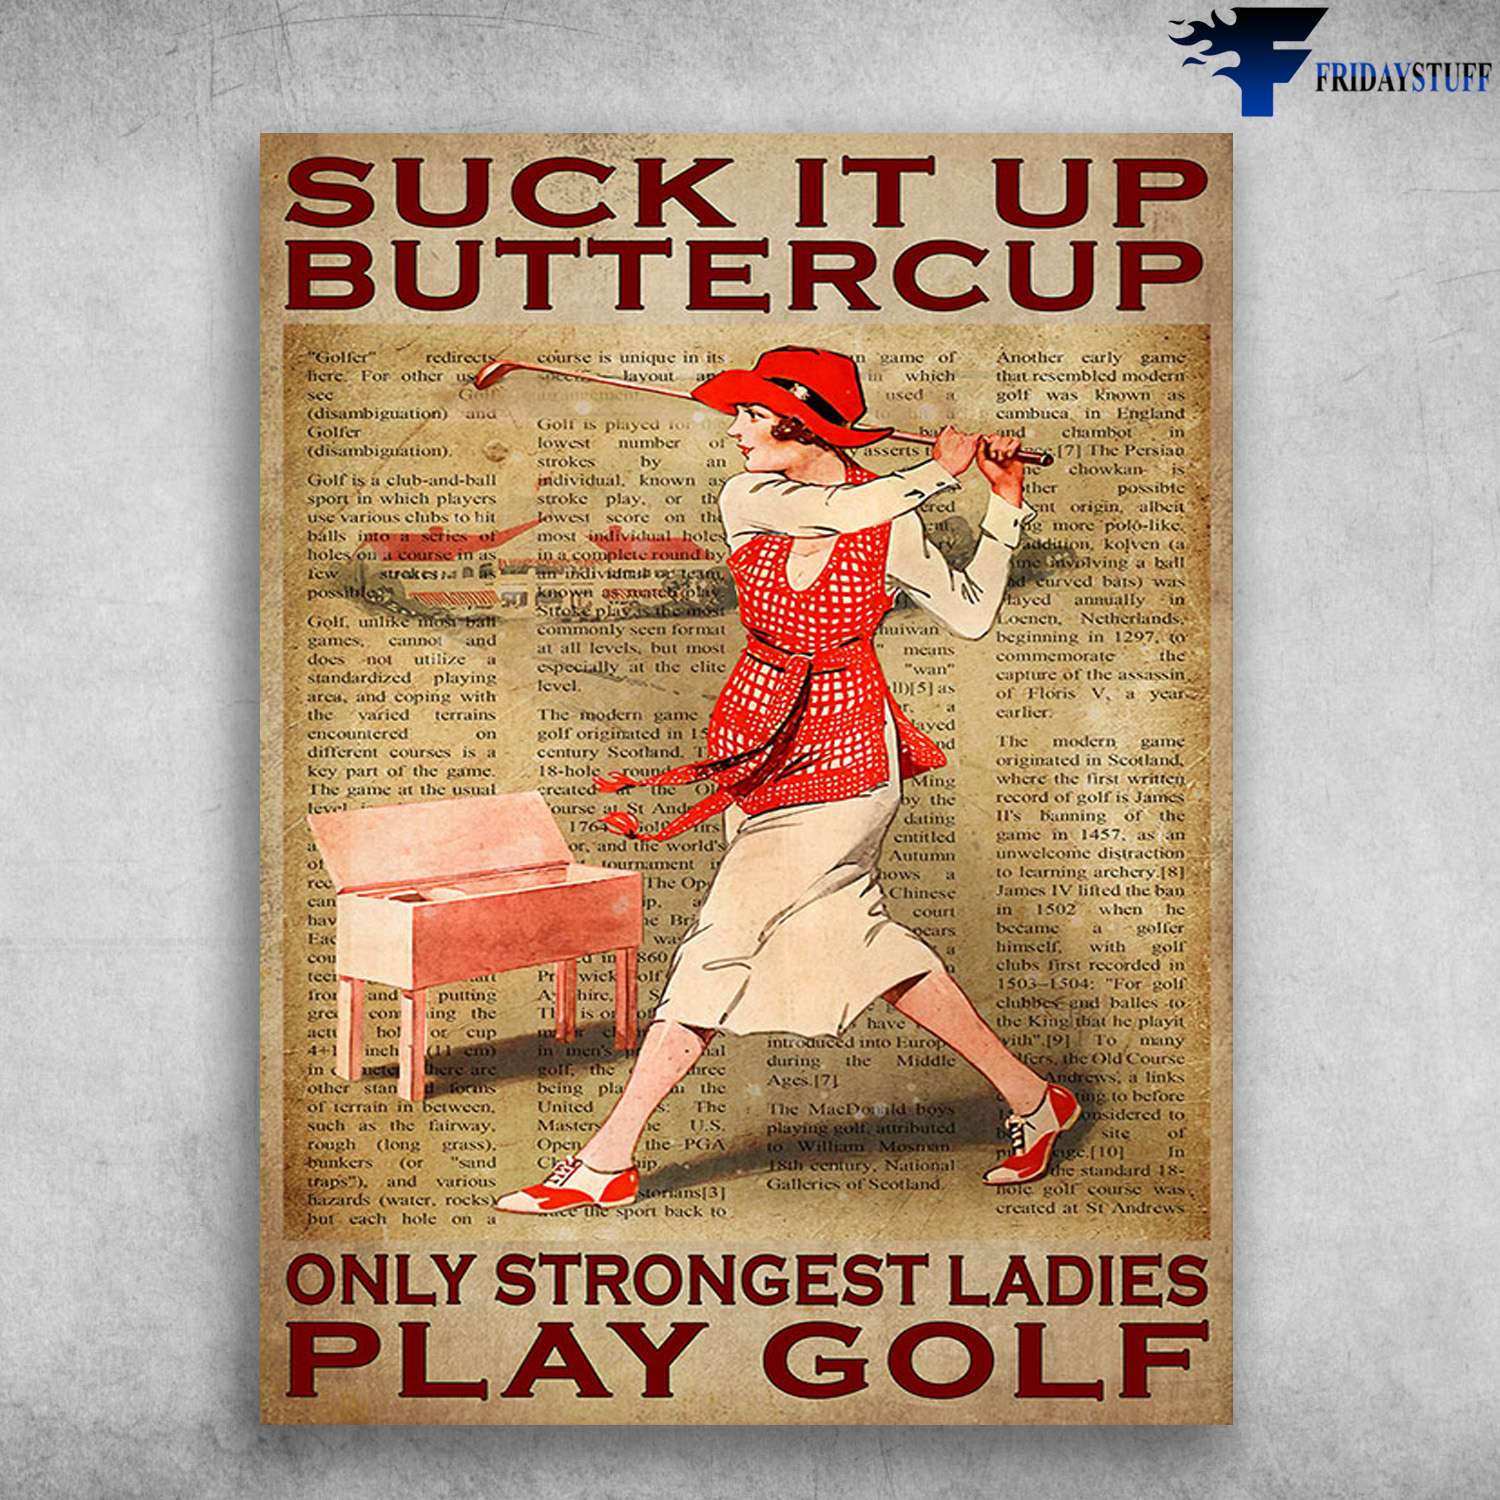 Golf Lover, Lady Plays Golf - Suck It Up Buttercup, Only Strongest Ladies Play Golf